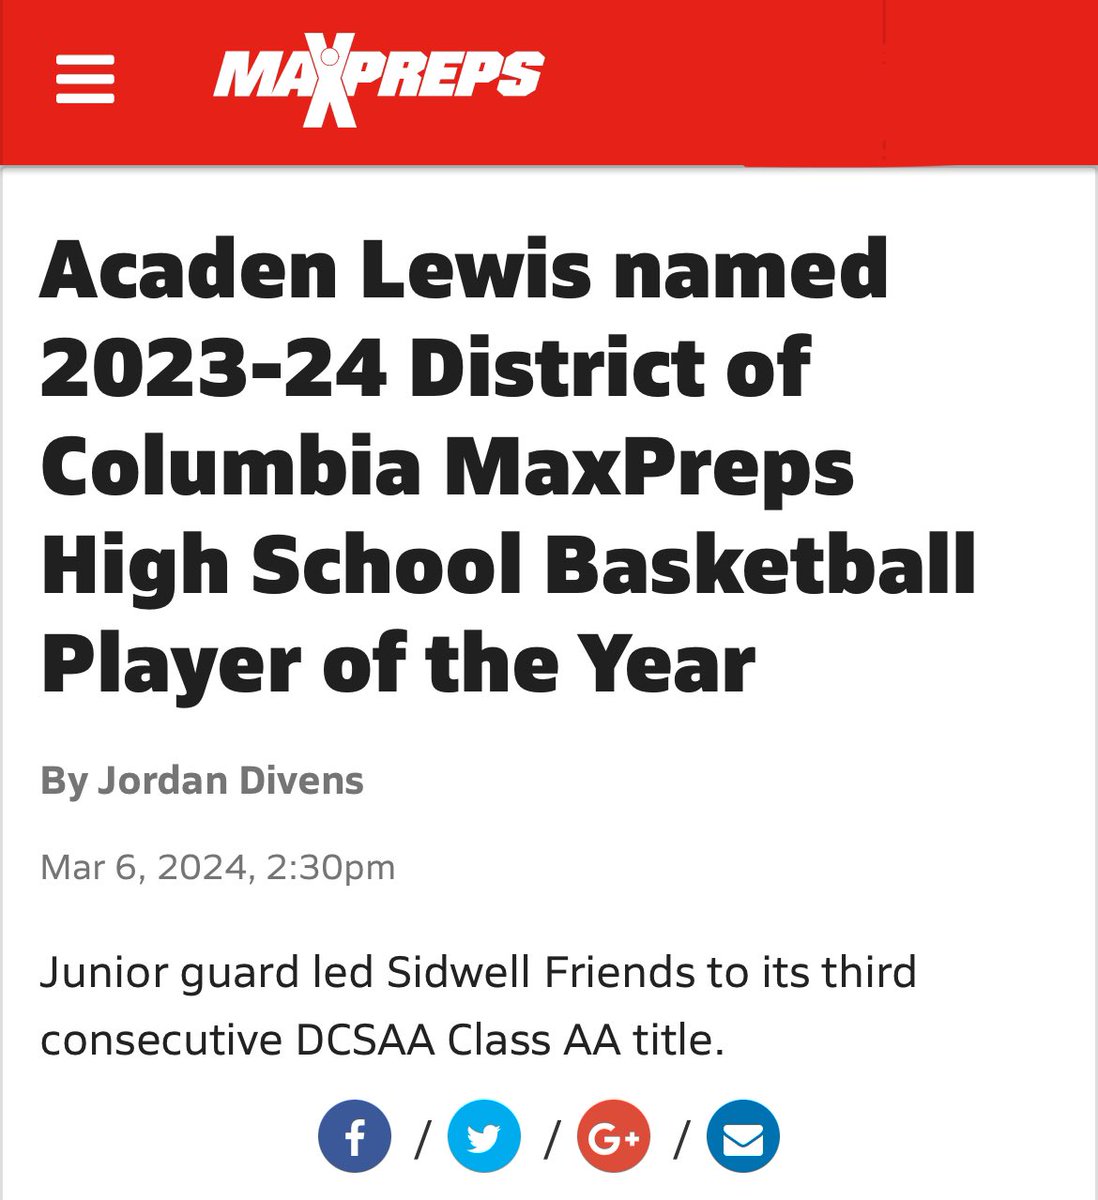 Blessed to be named MaxPreps DC player of the year!! 🙏🏽